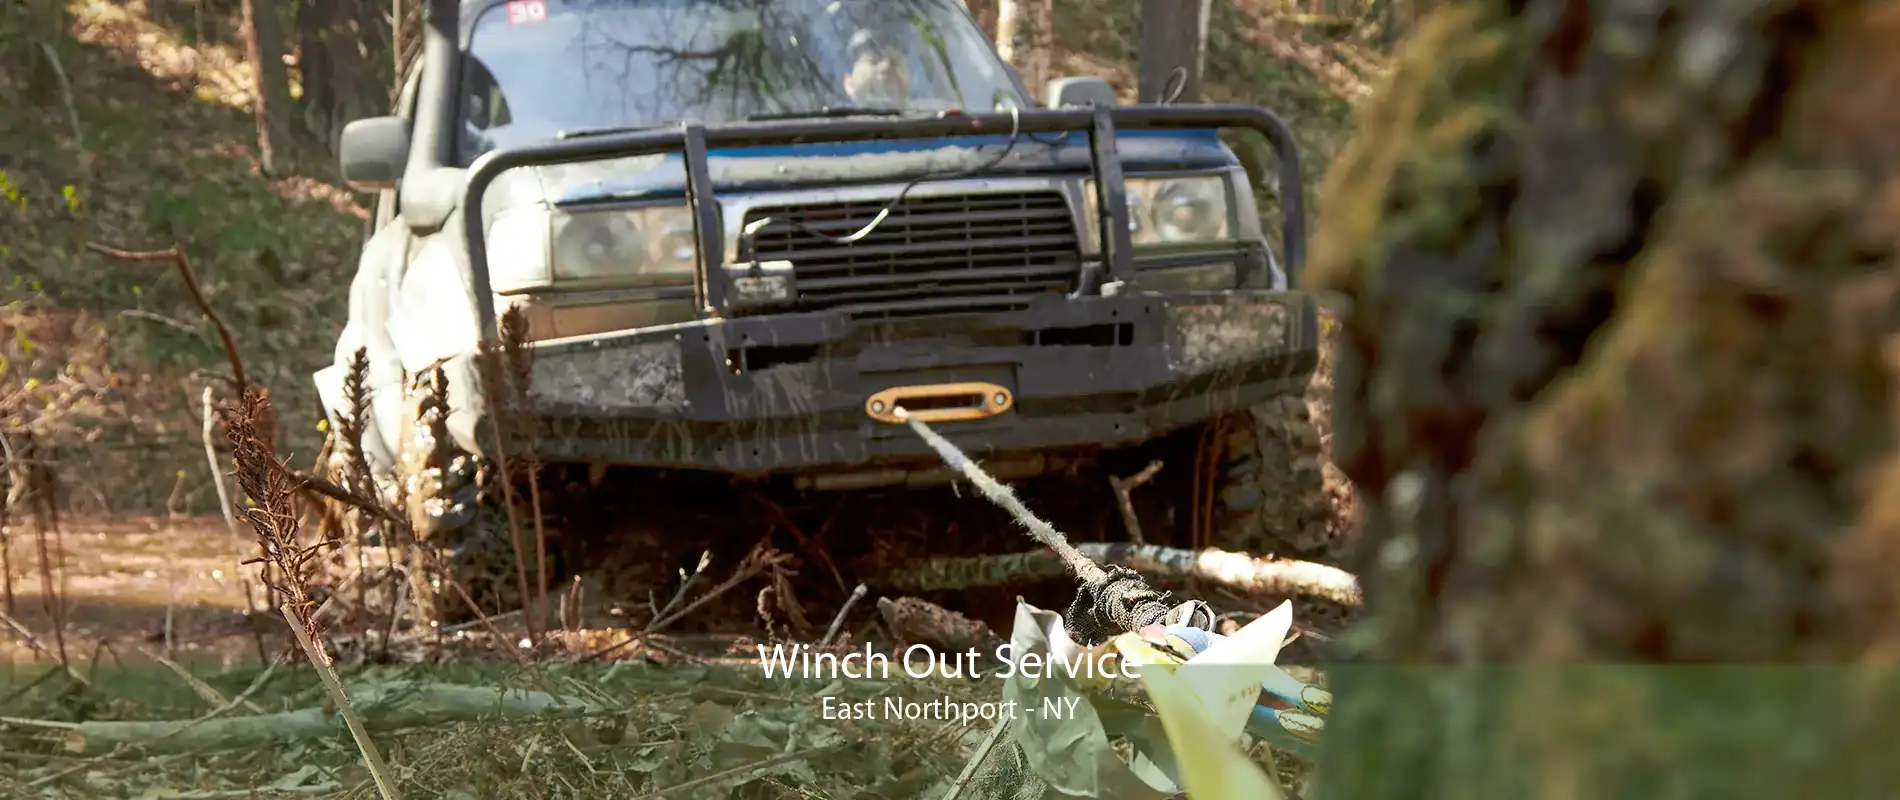 Winch Out Service East Northport - NY